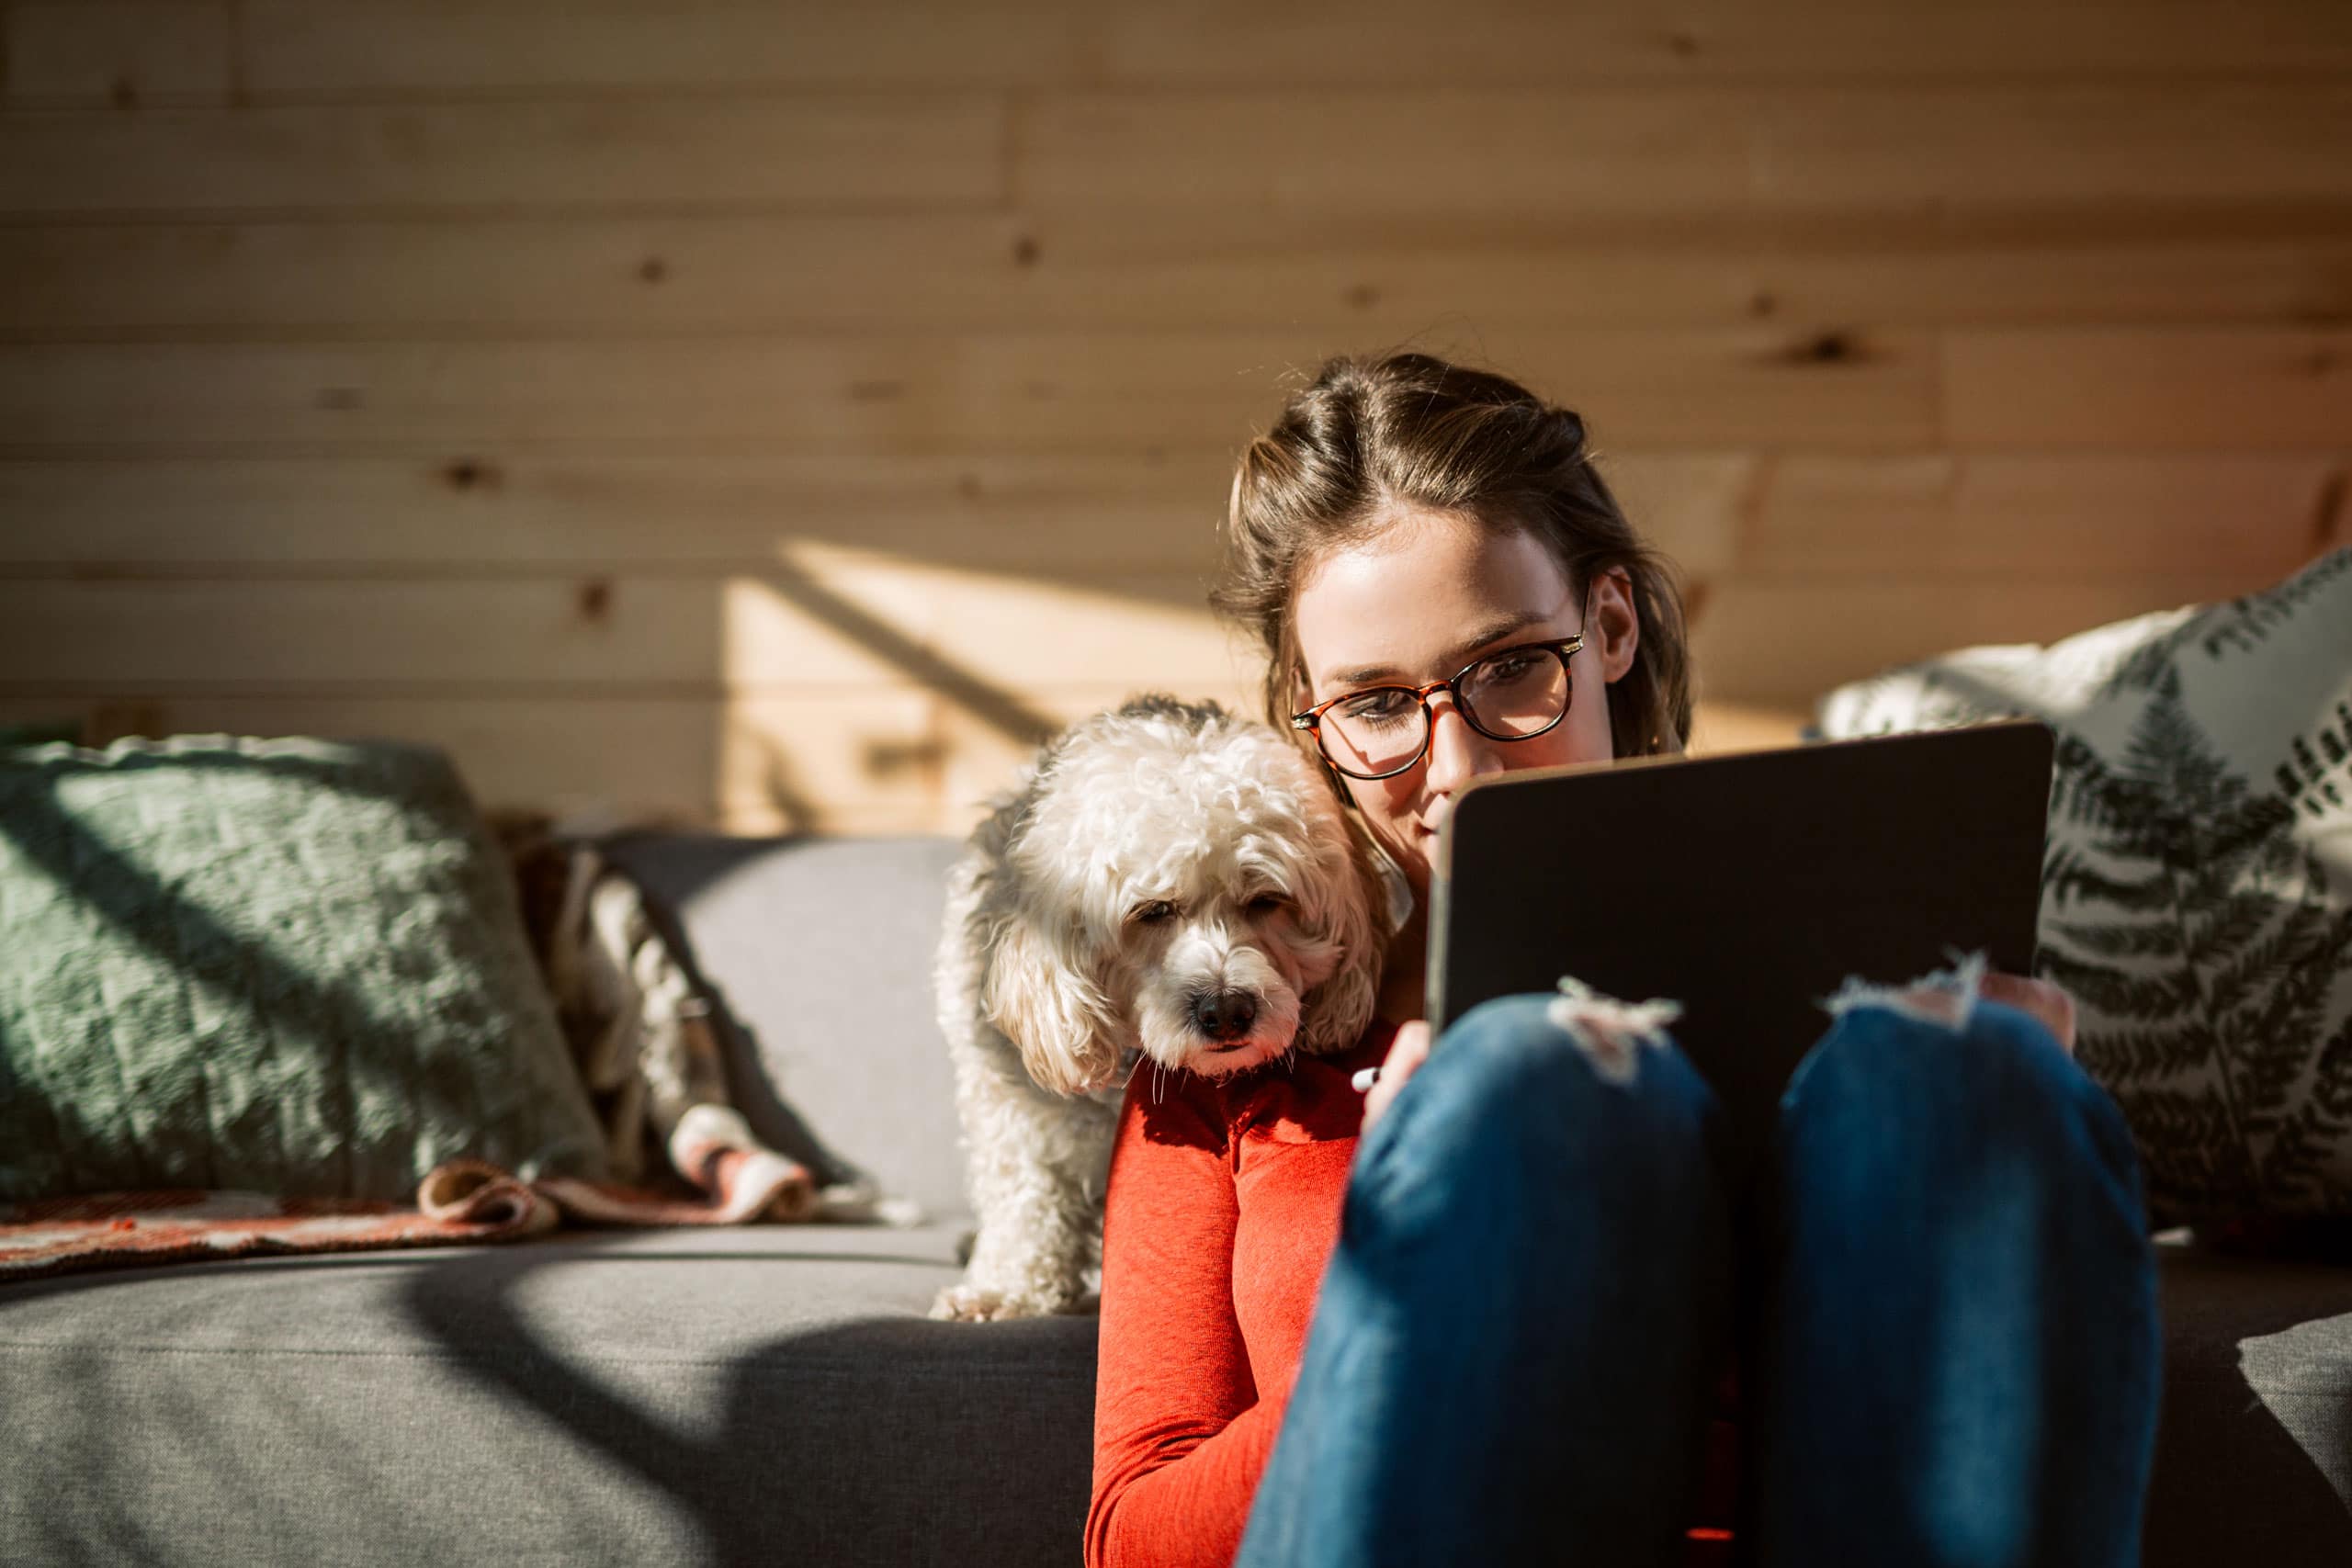 Recruiting challenge onsite job;Women working from home and not onsite while sitting with pet dog